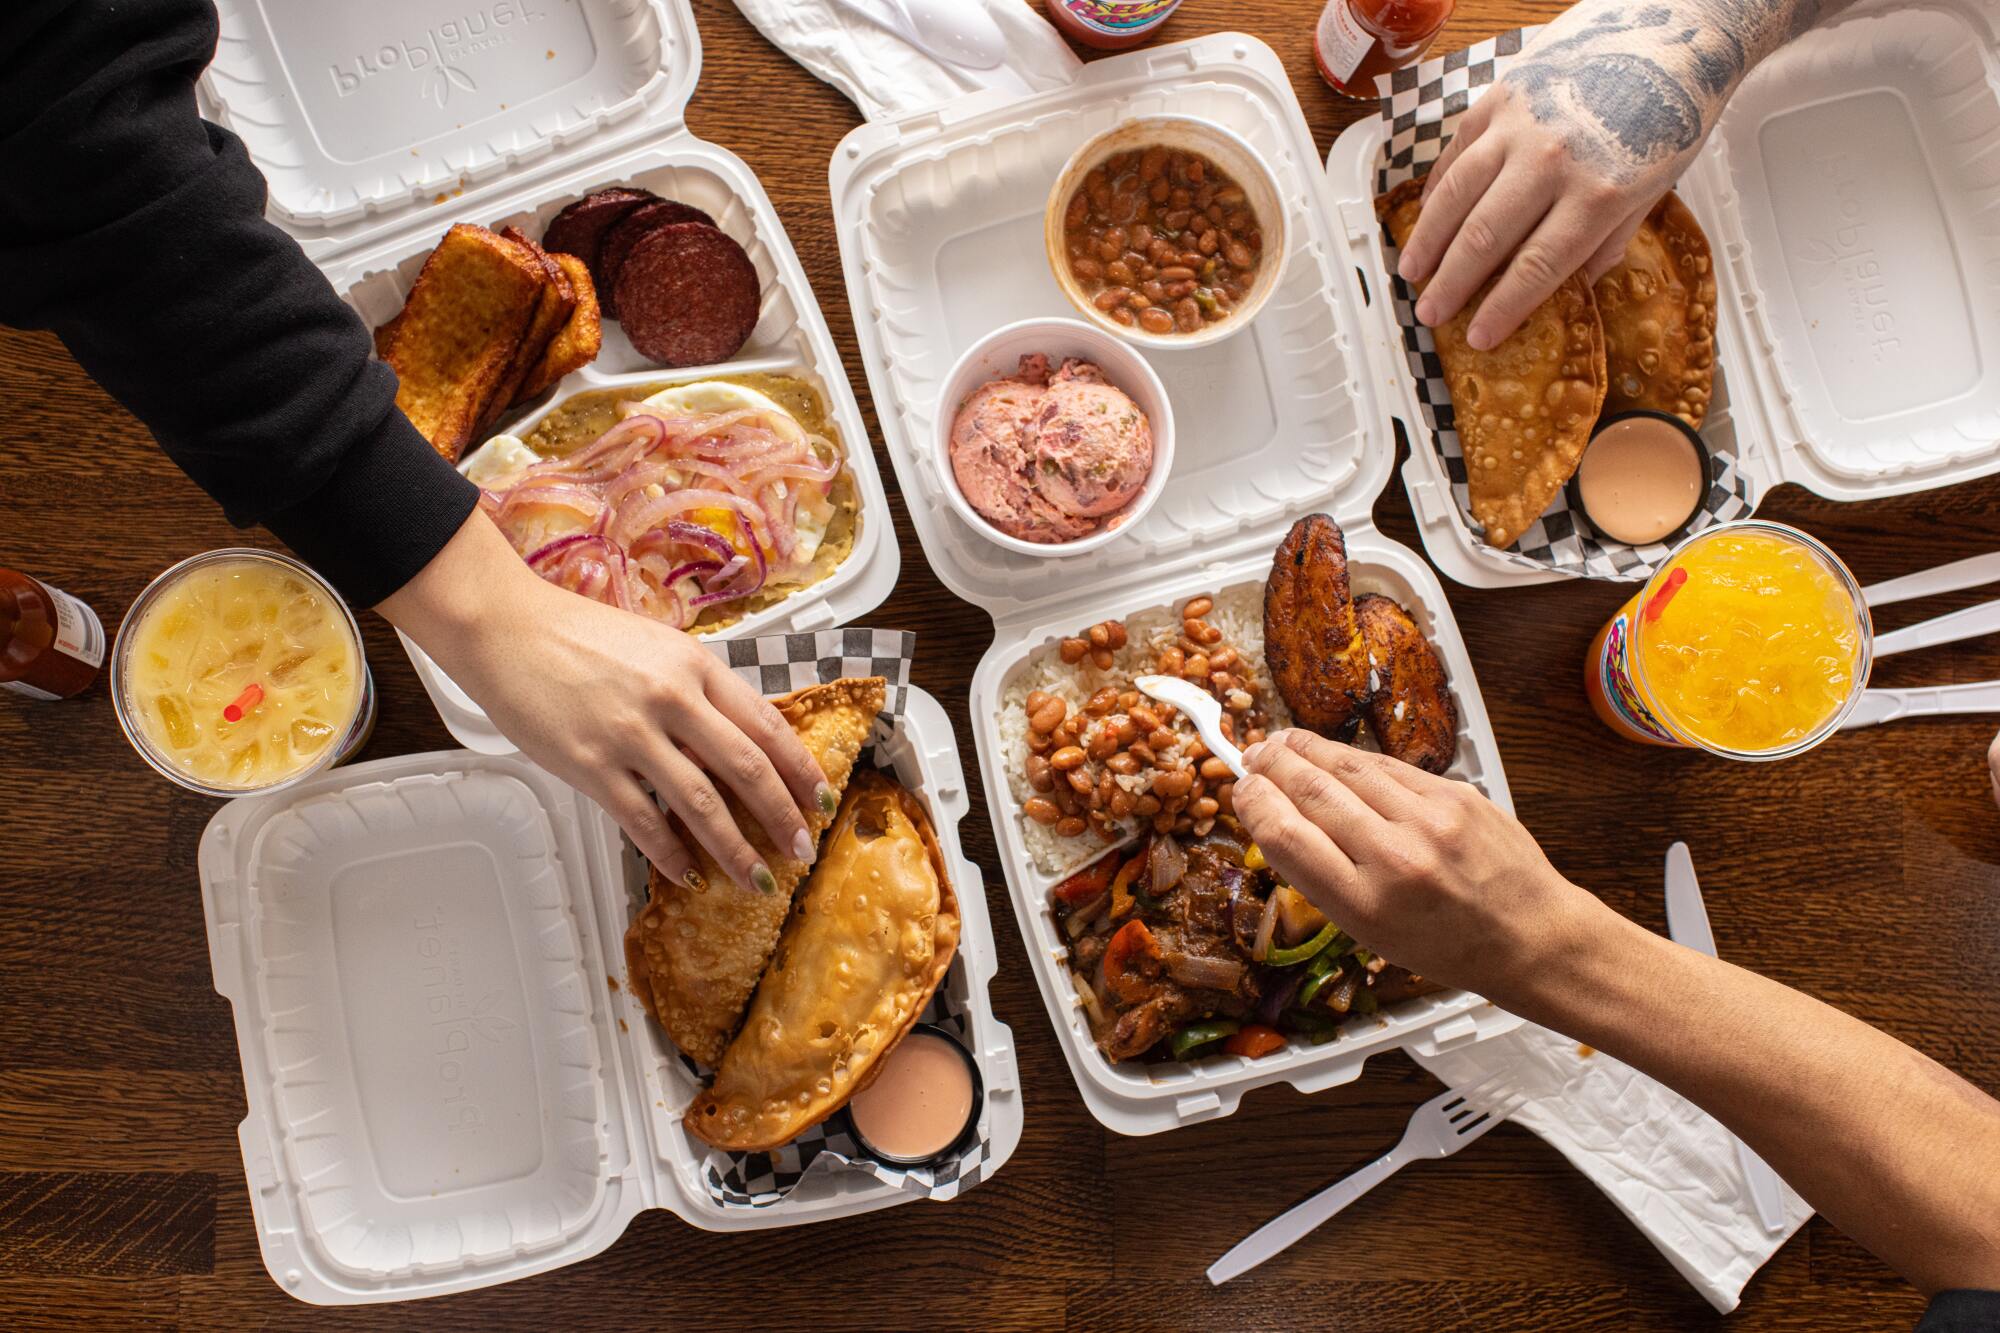 Hands reach over five Styrofoam containers of food from El Bacano. 